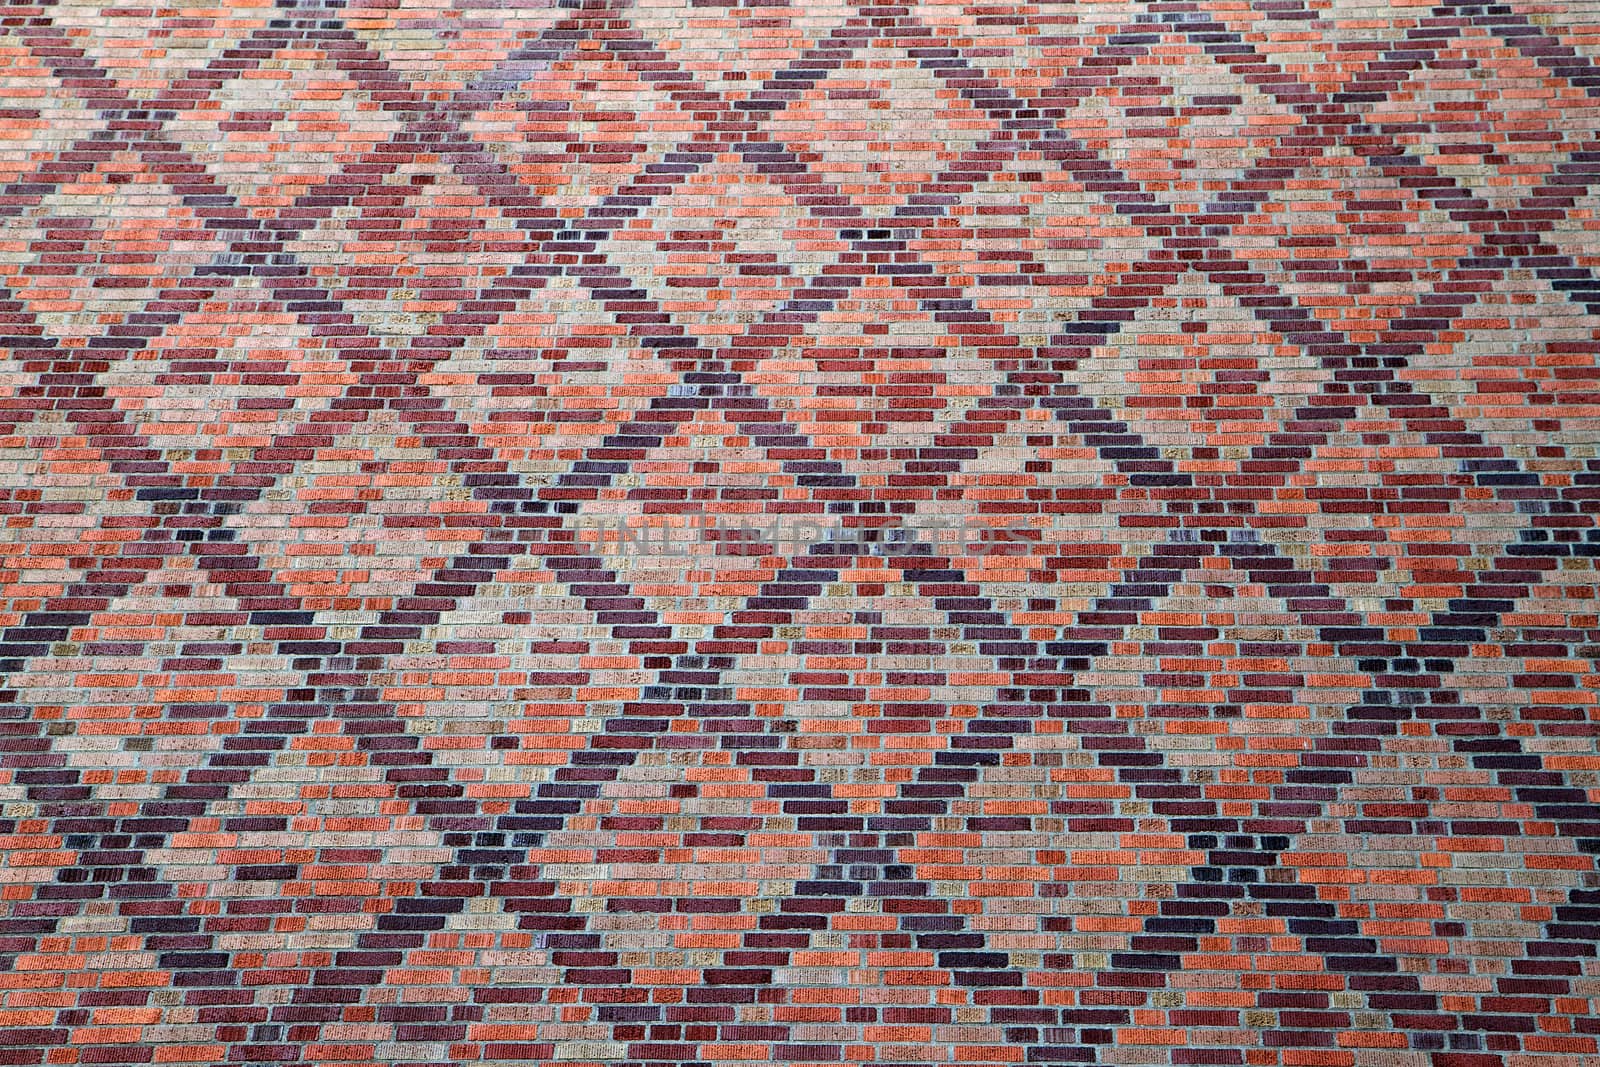 Large wall of various shades of red brick in a cross pattern